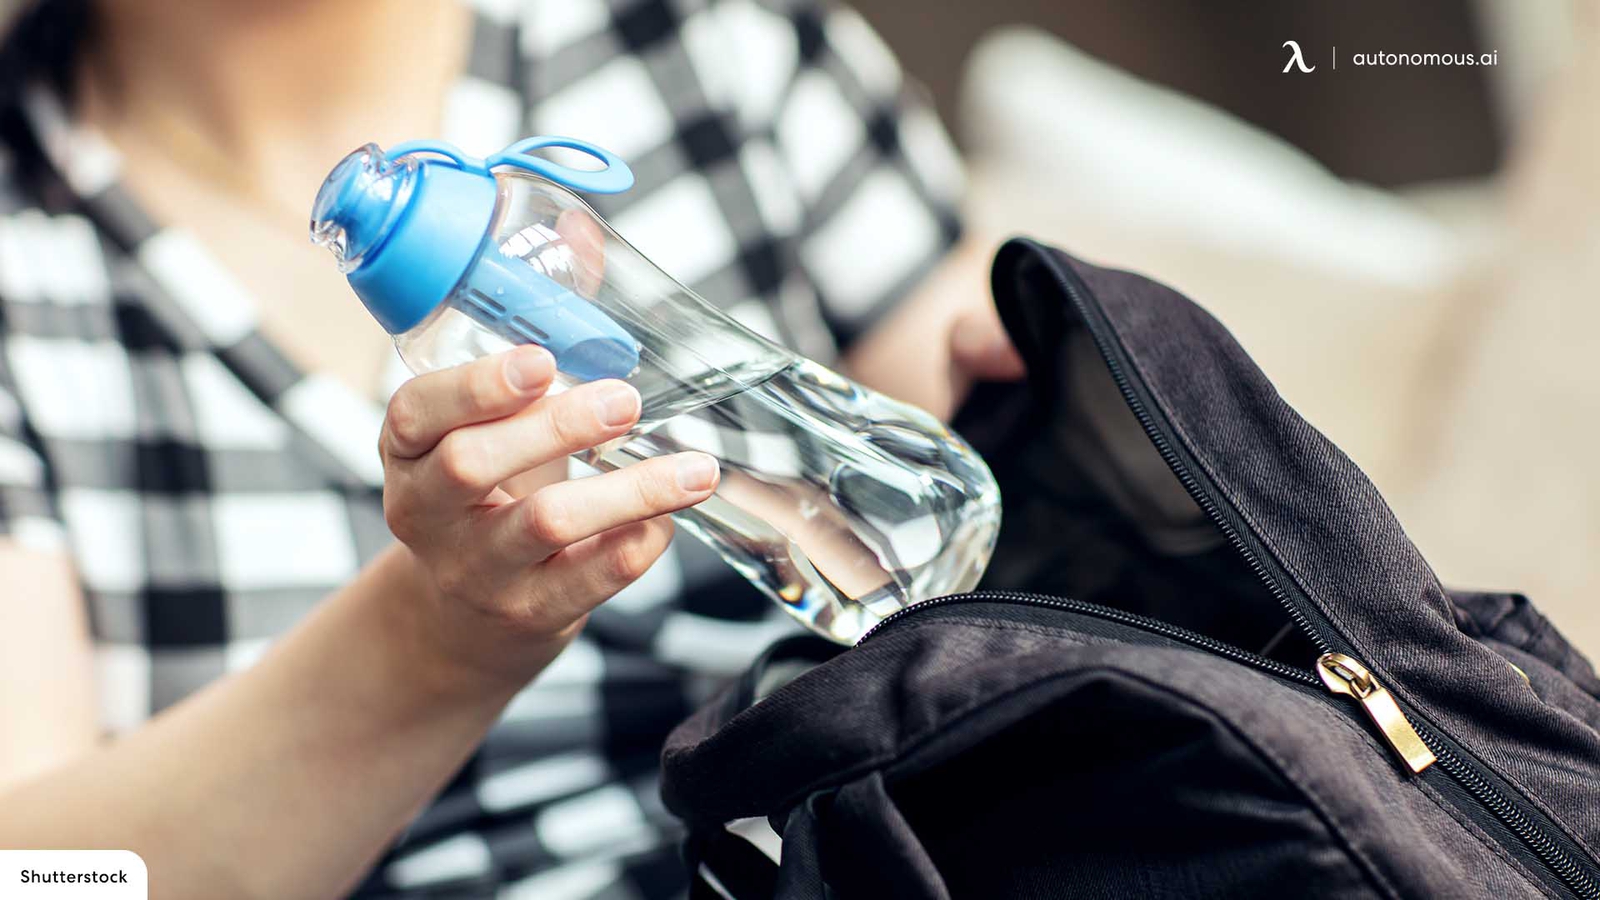 10 Best Filtered Water Bottles for Travel & Hiking (2023 Review)